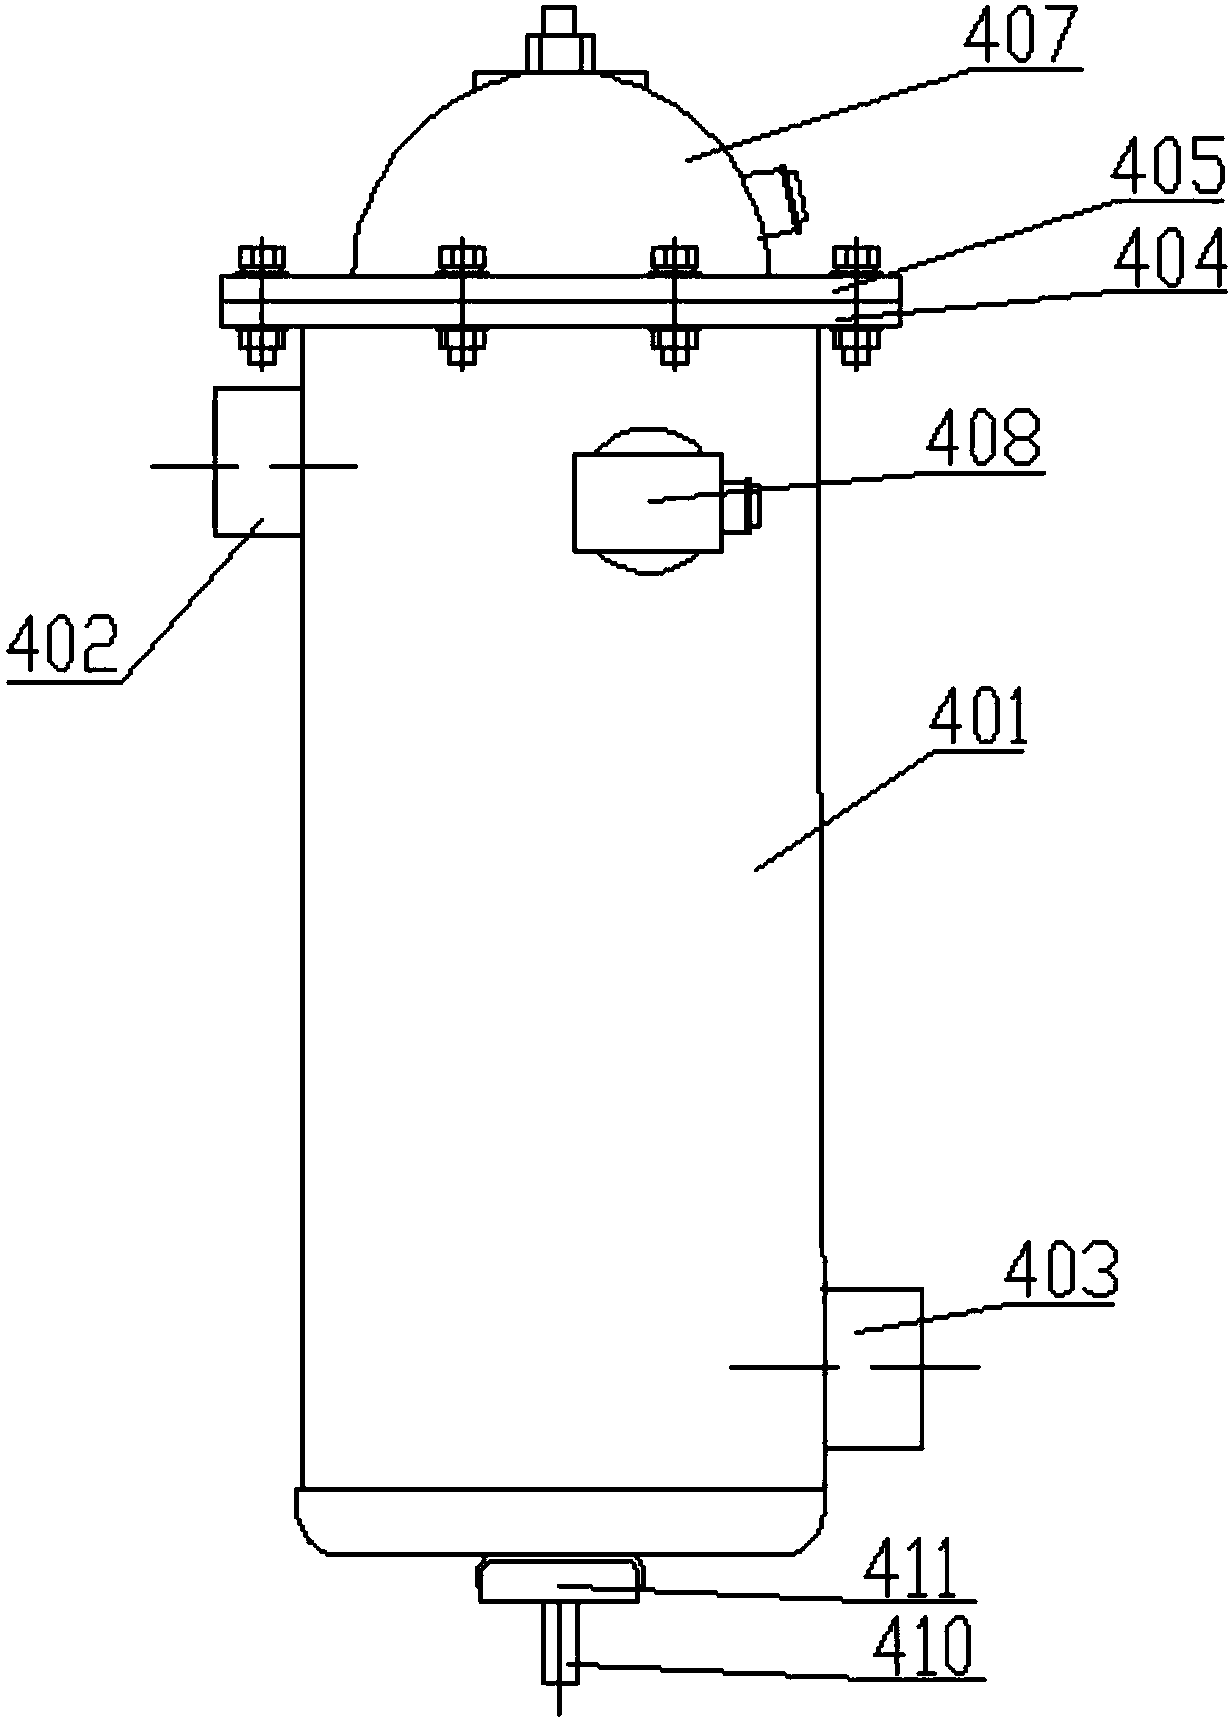 Working method of four-way industrial thermostat with tube heater